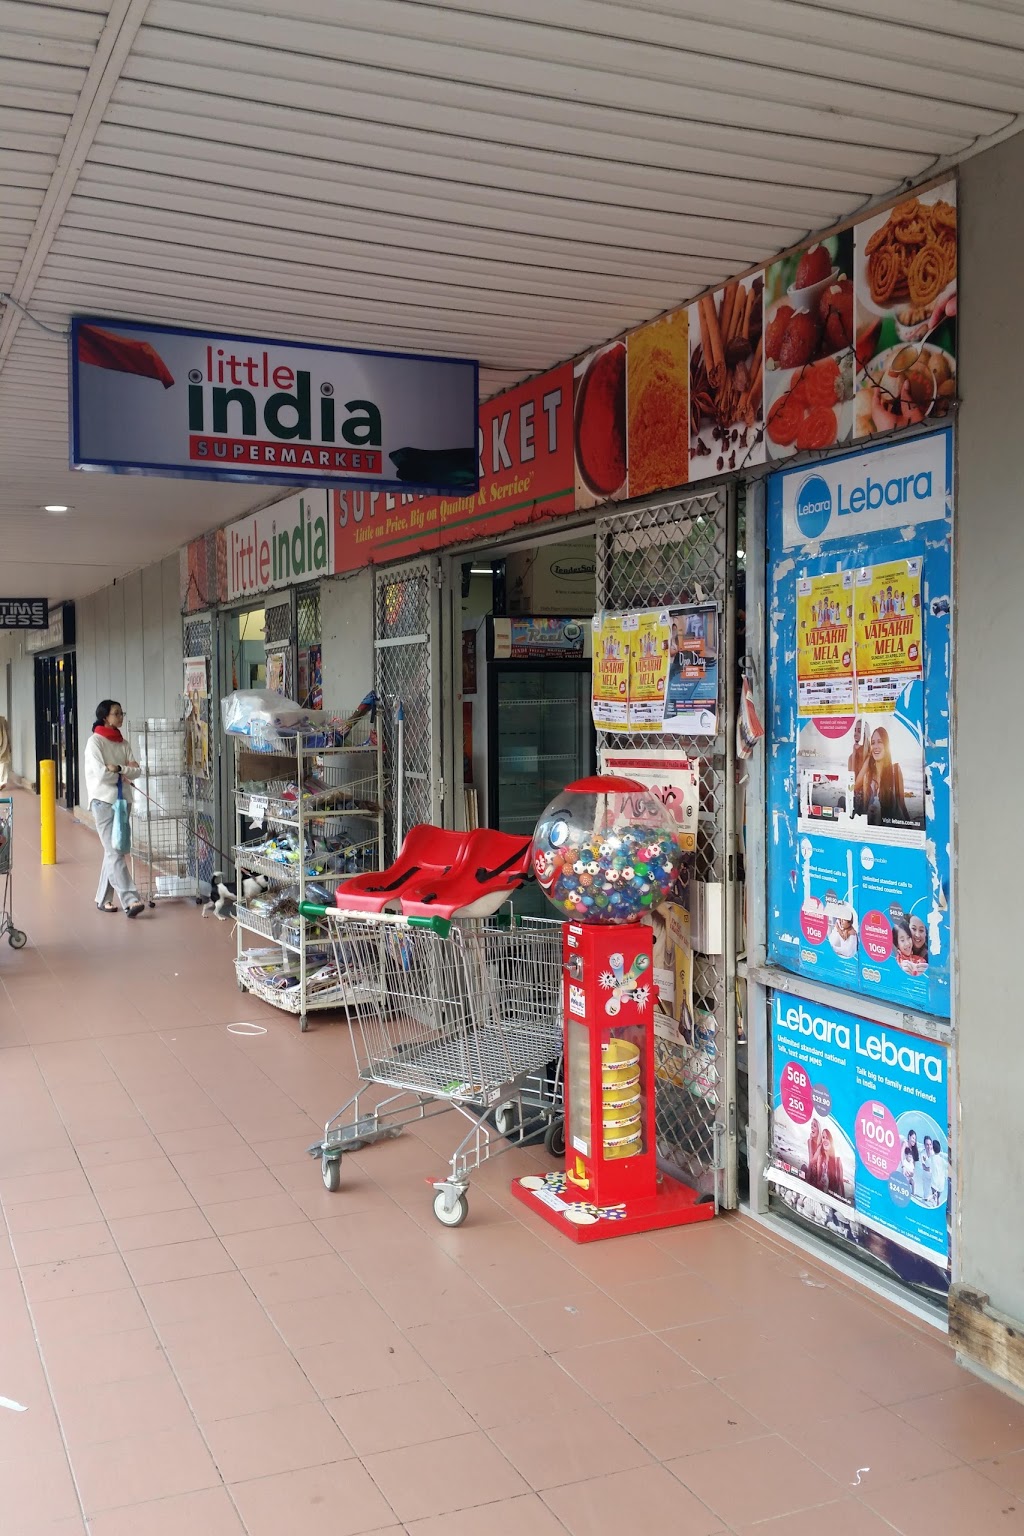 Df32065b25ad34ff1aacc6140ad038a7  New South Wales Cumberland Council Wentworthville Little India Supermarket 02 9896 1771html 